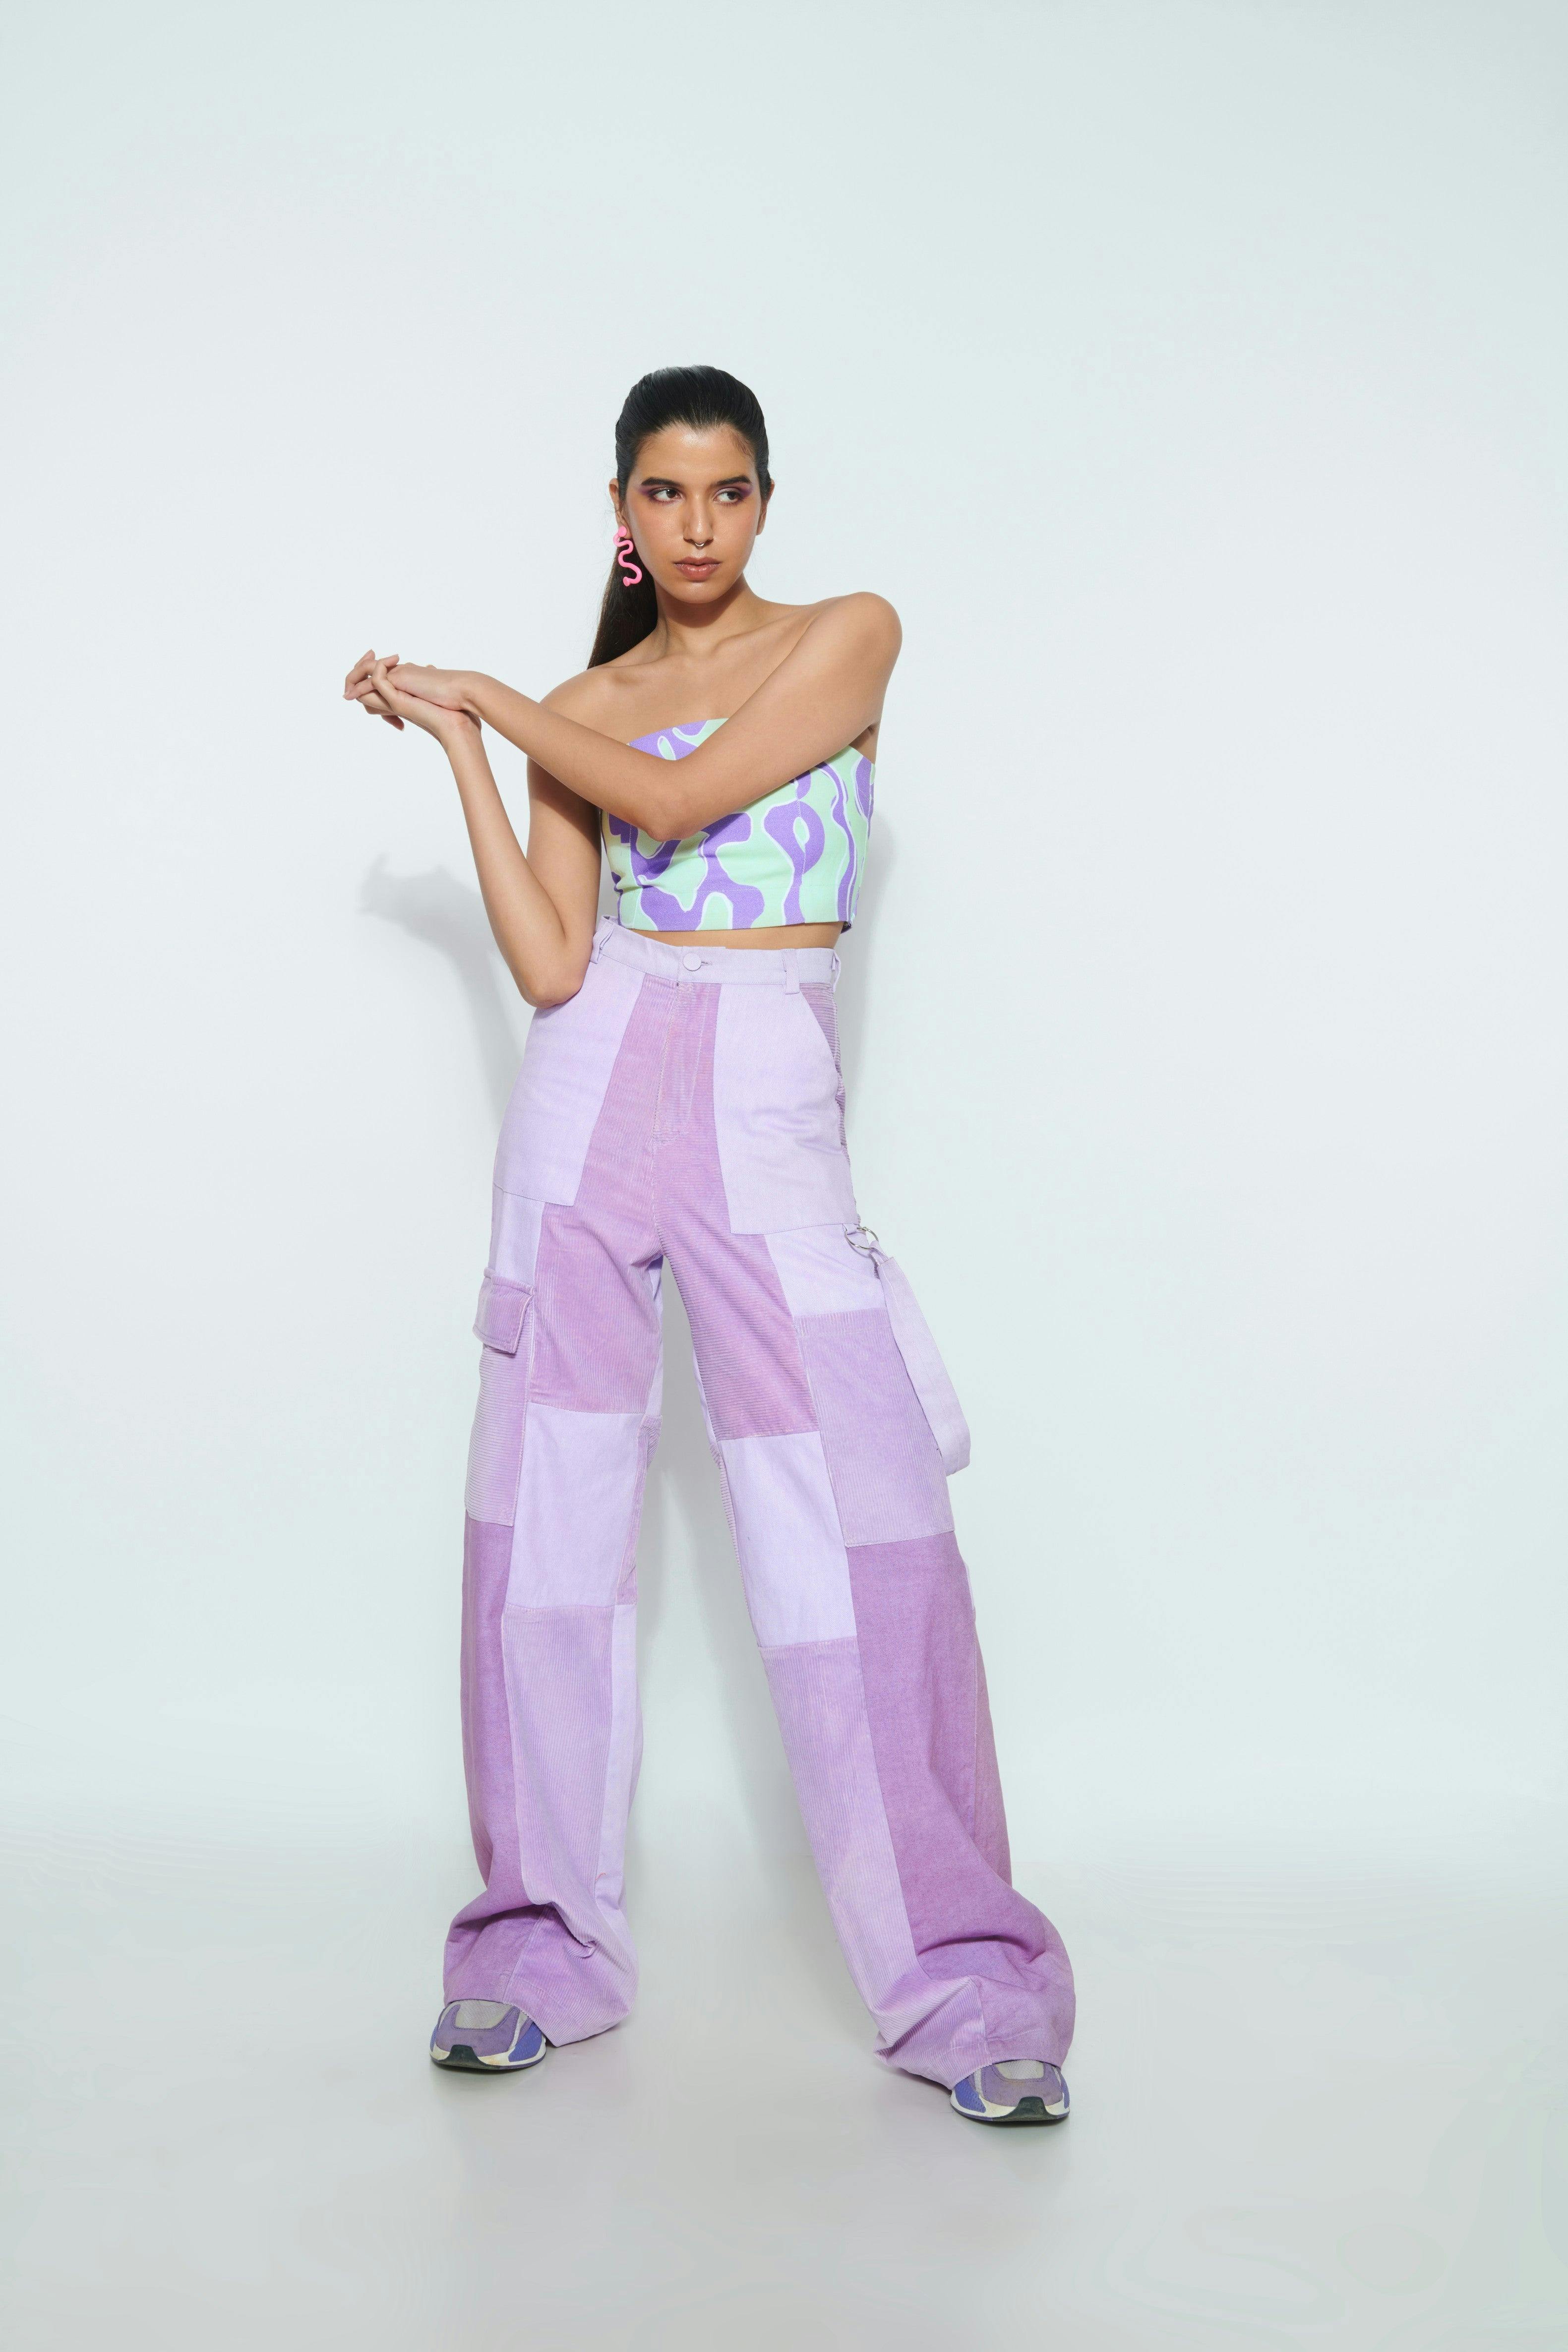 Thumbnail preview #2 for PURPLE SLIME CROP TOP AND GUMMY BEAR PANTS CO-ORD SET- FULL SET